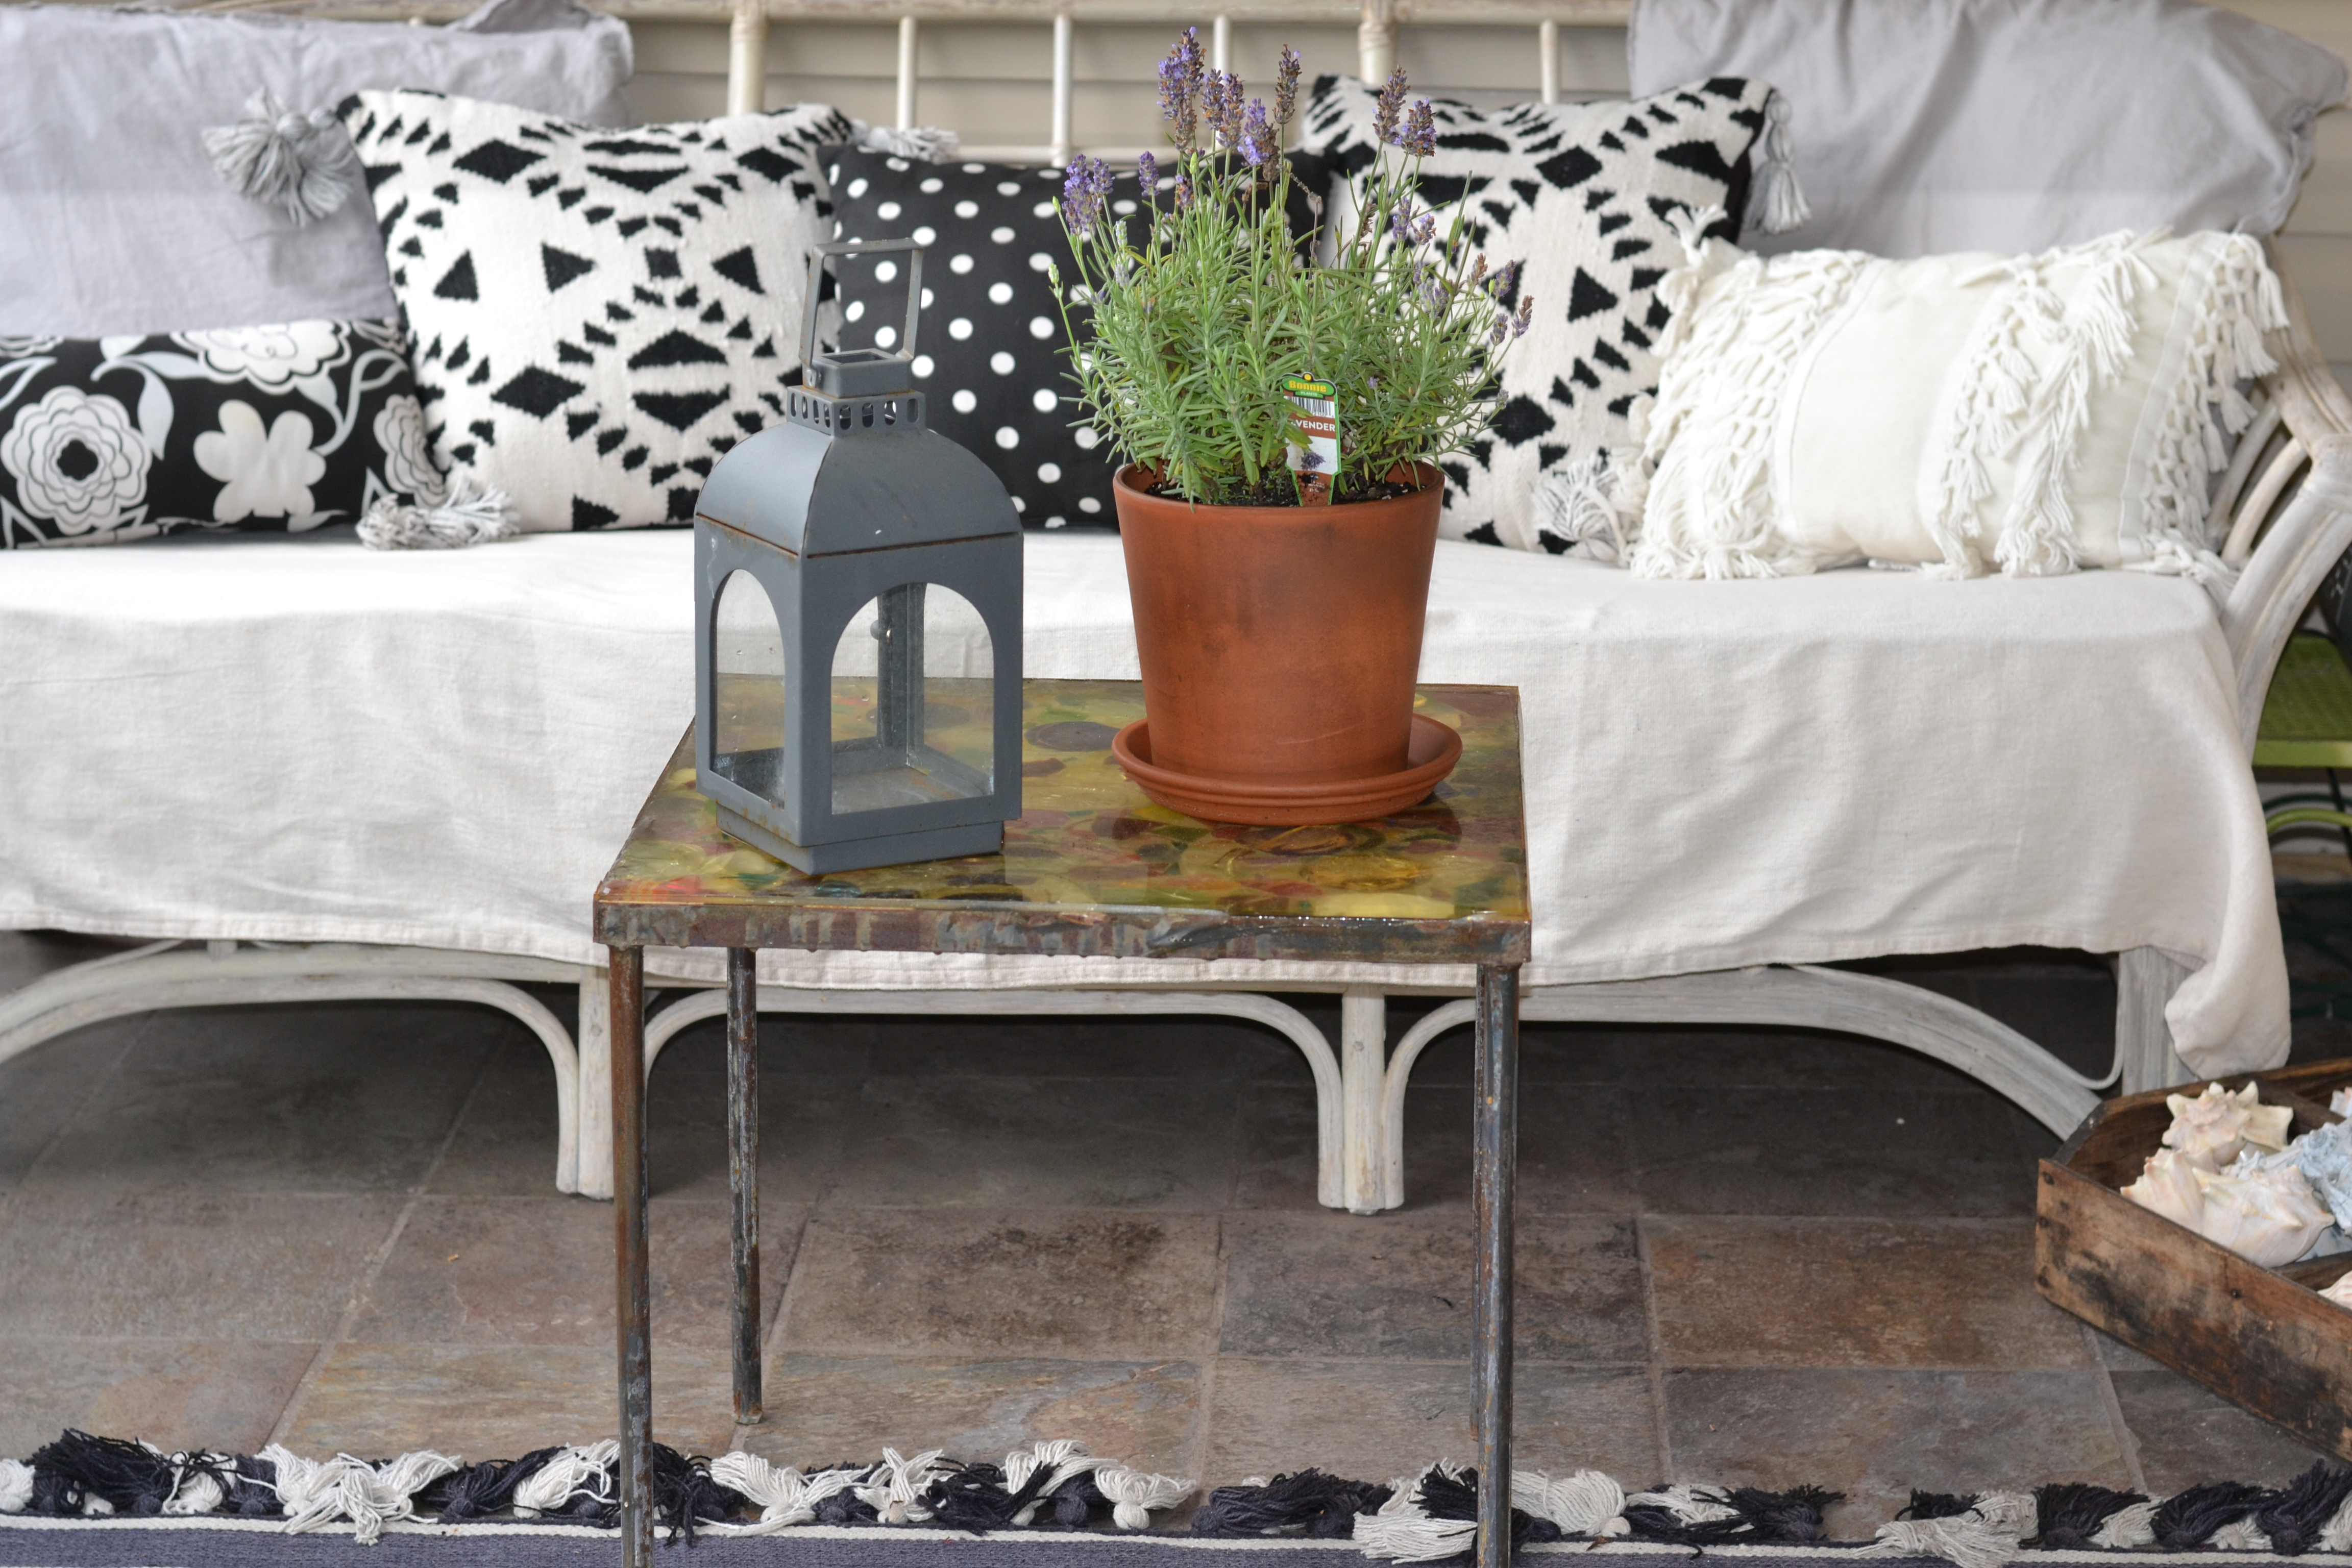 Refreshed outdoor cushions